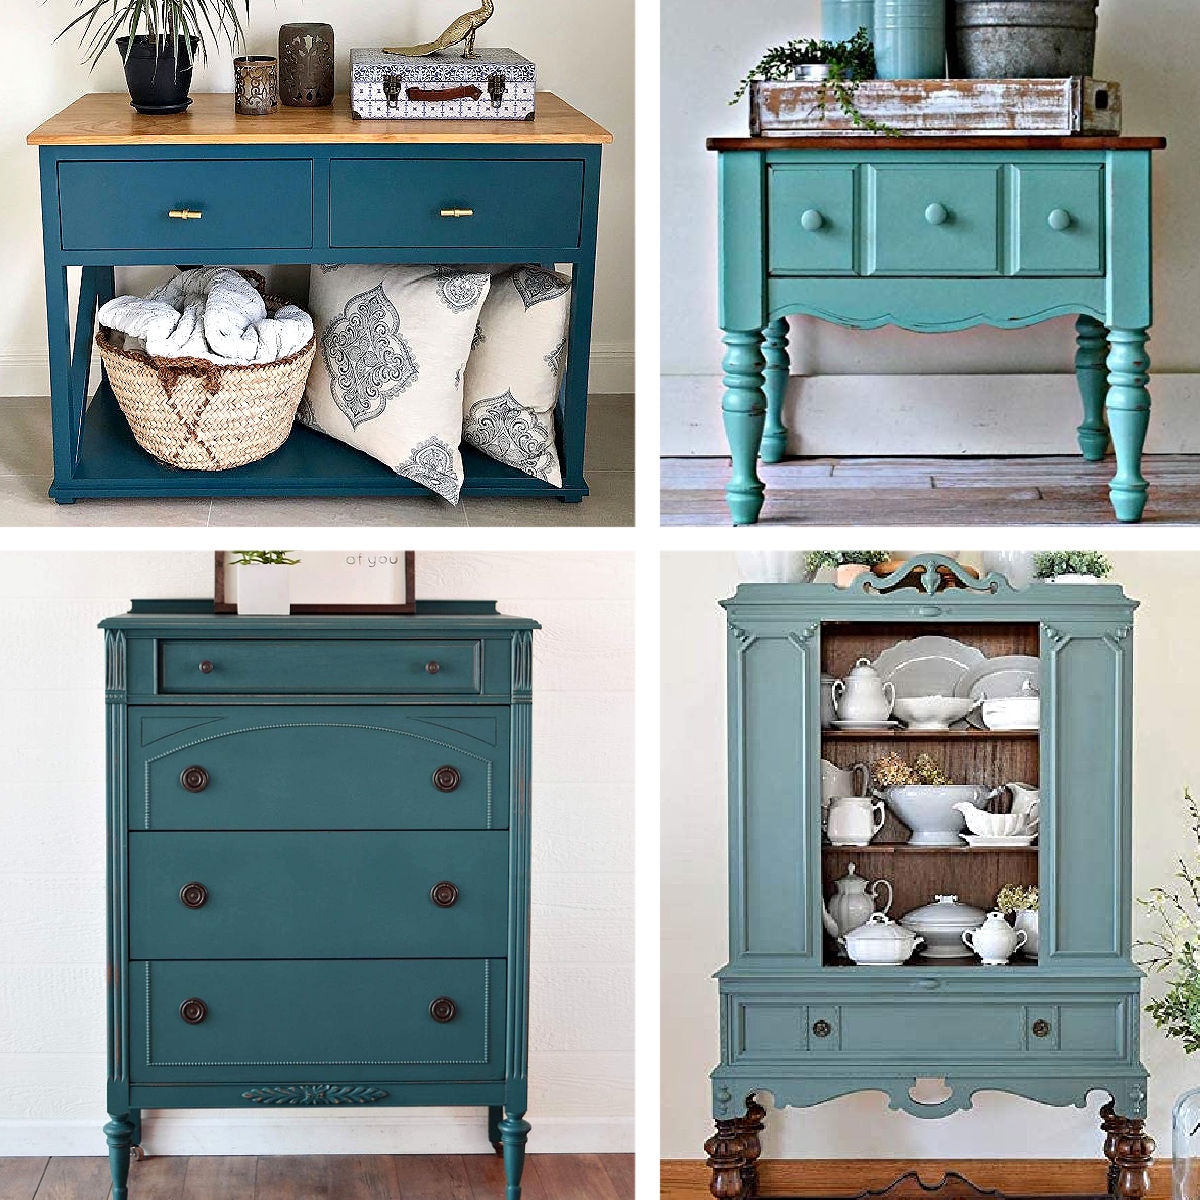 Chalk Painted Furniture